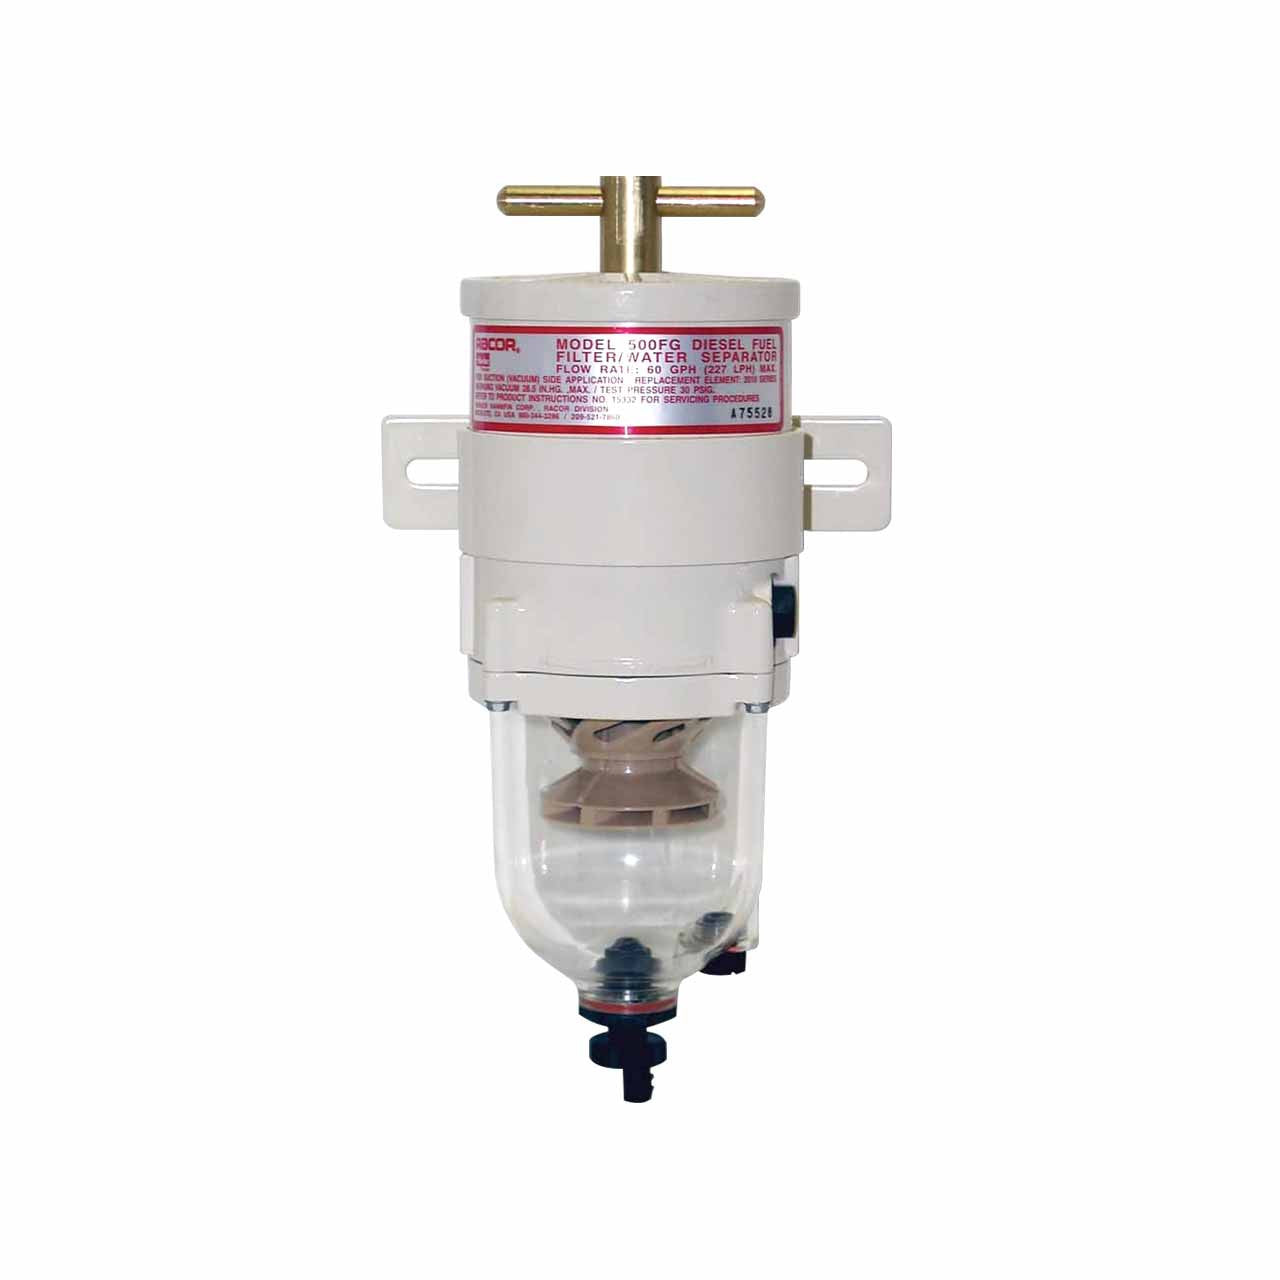 10 Micron Turbine Fuel Filter Water Separator with Clear Plastic Bowl - Racor 500FG10 Turbine Series